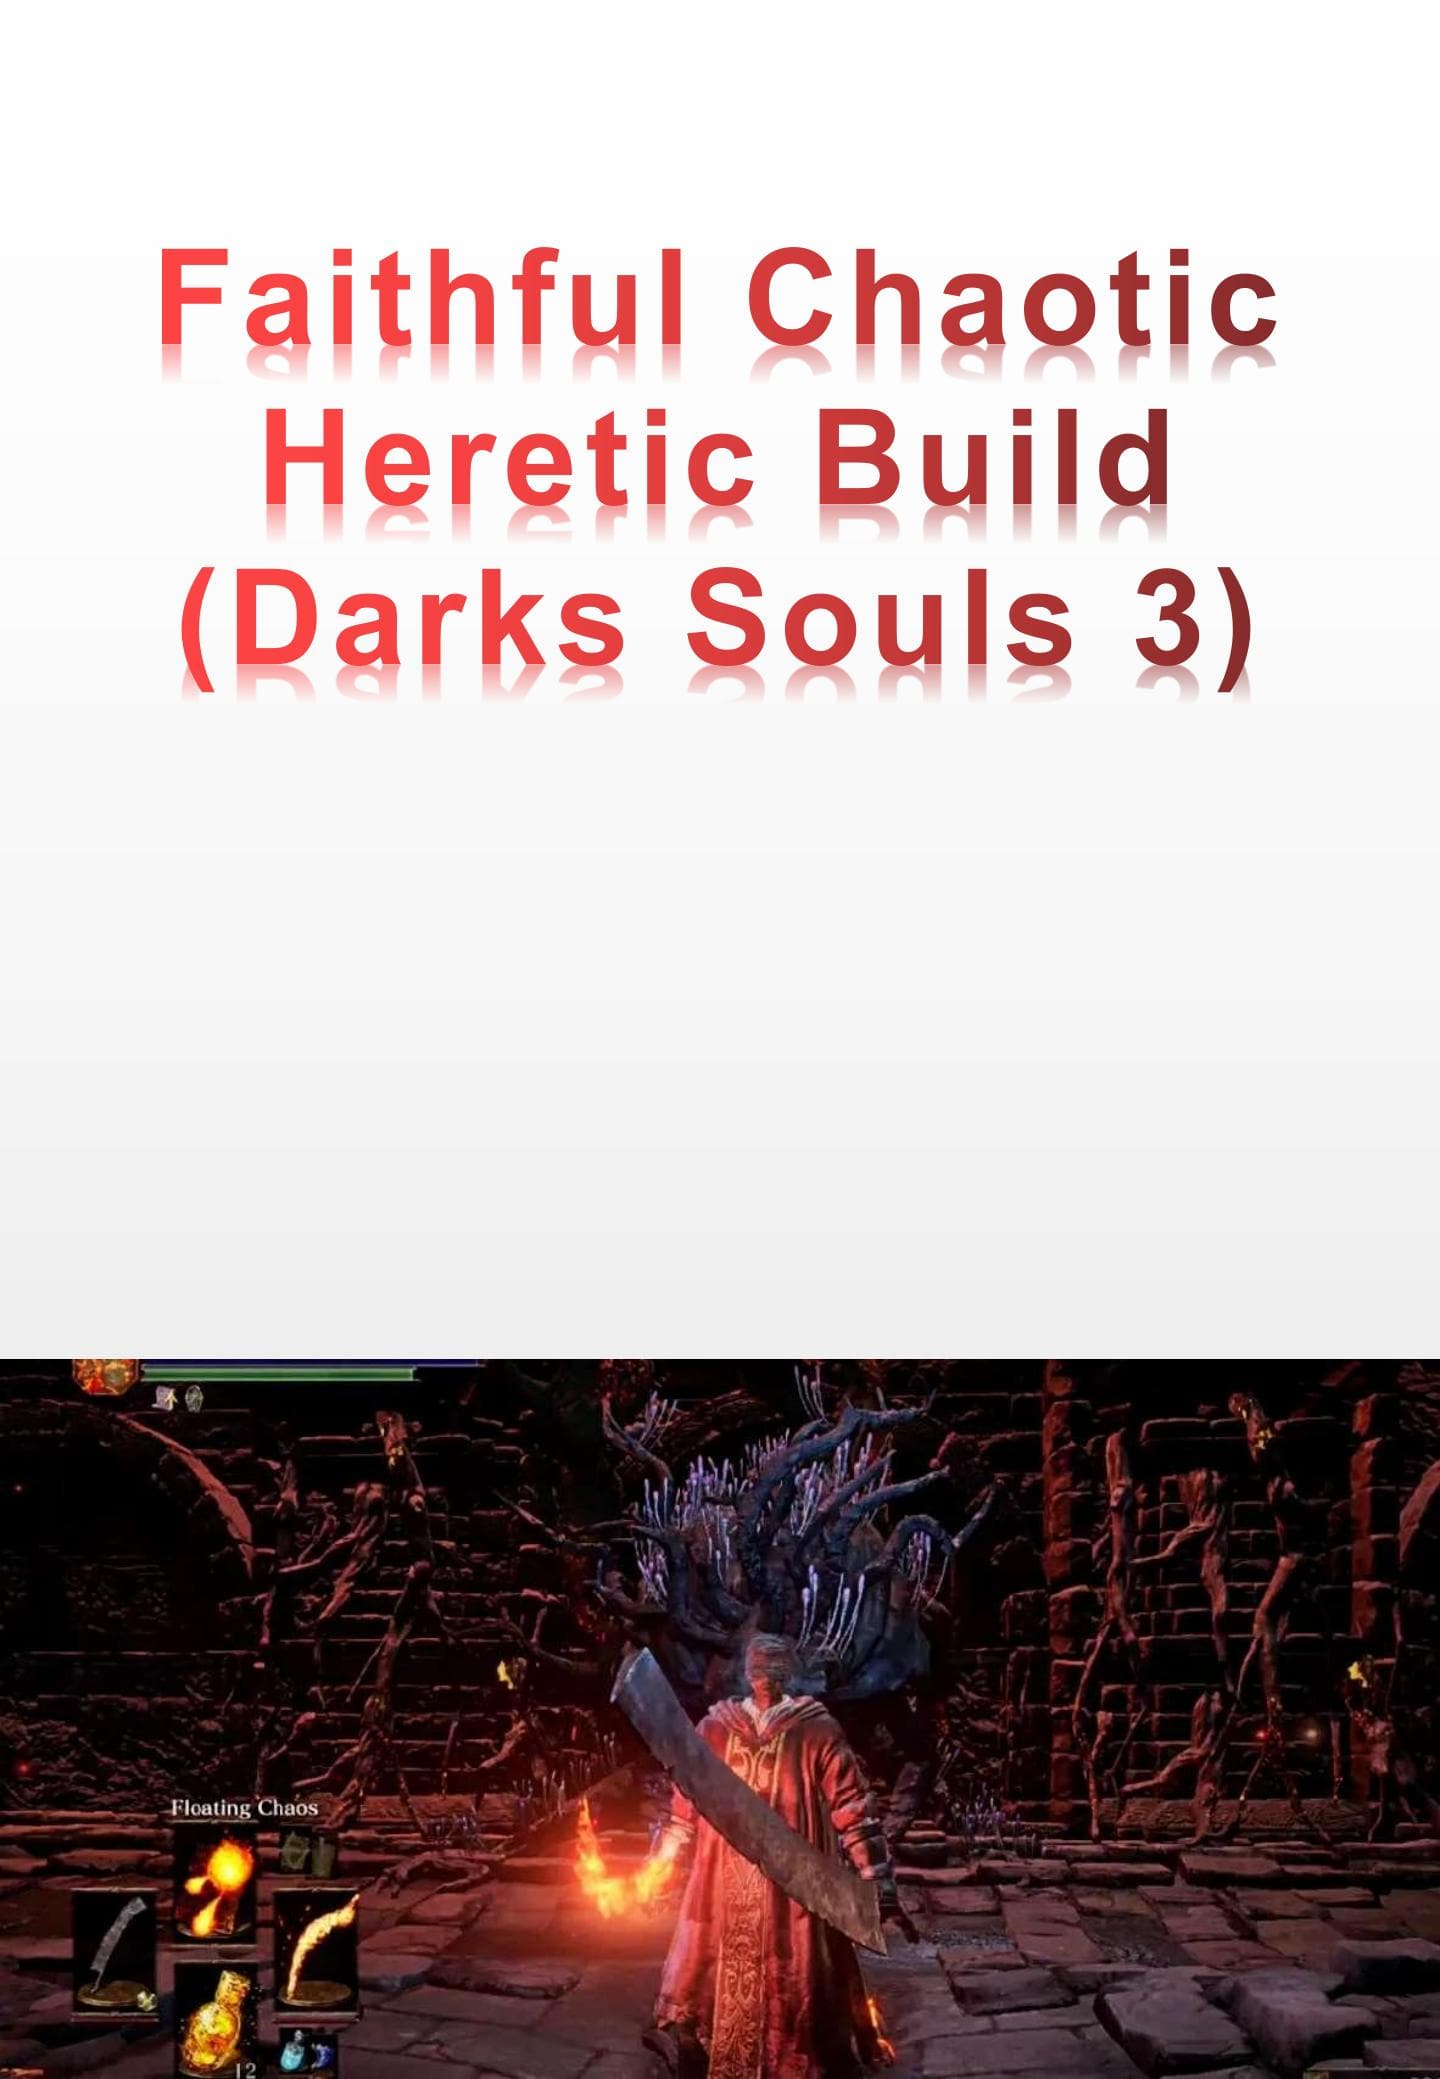 Faithful Chaotic Heretic Build - (Darks Souls 3)